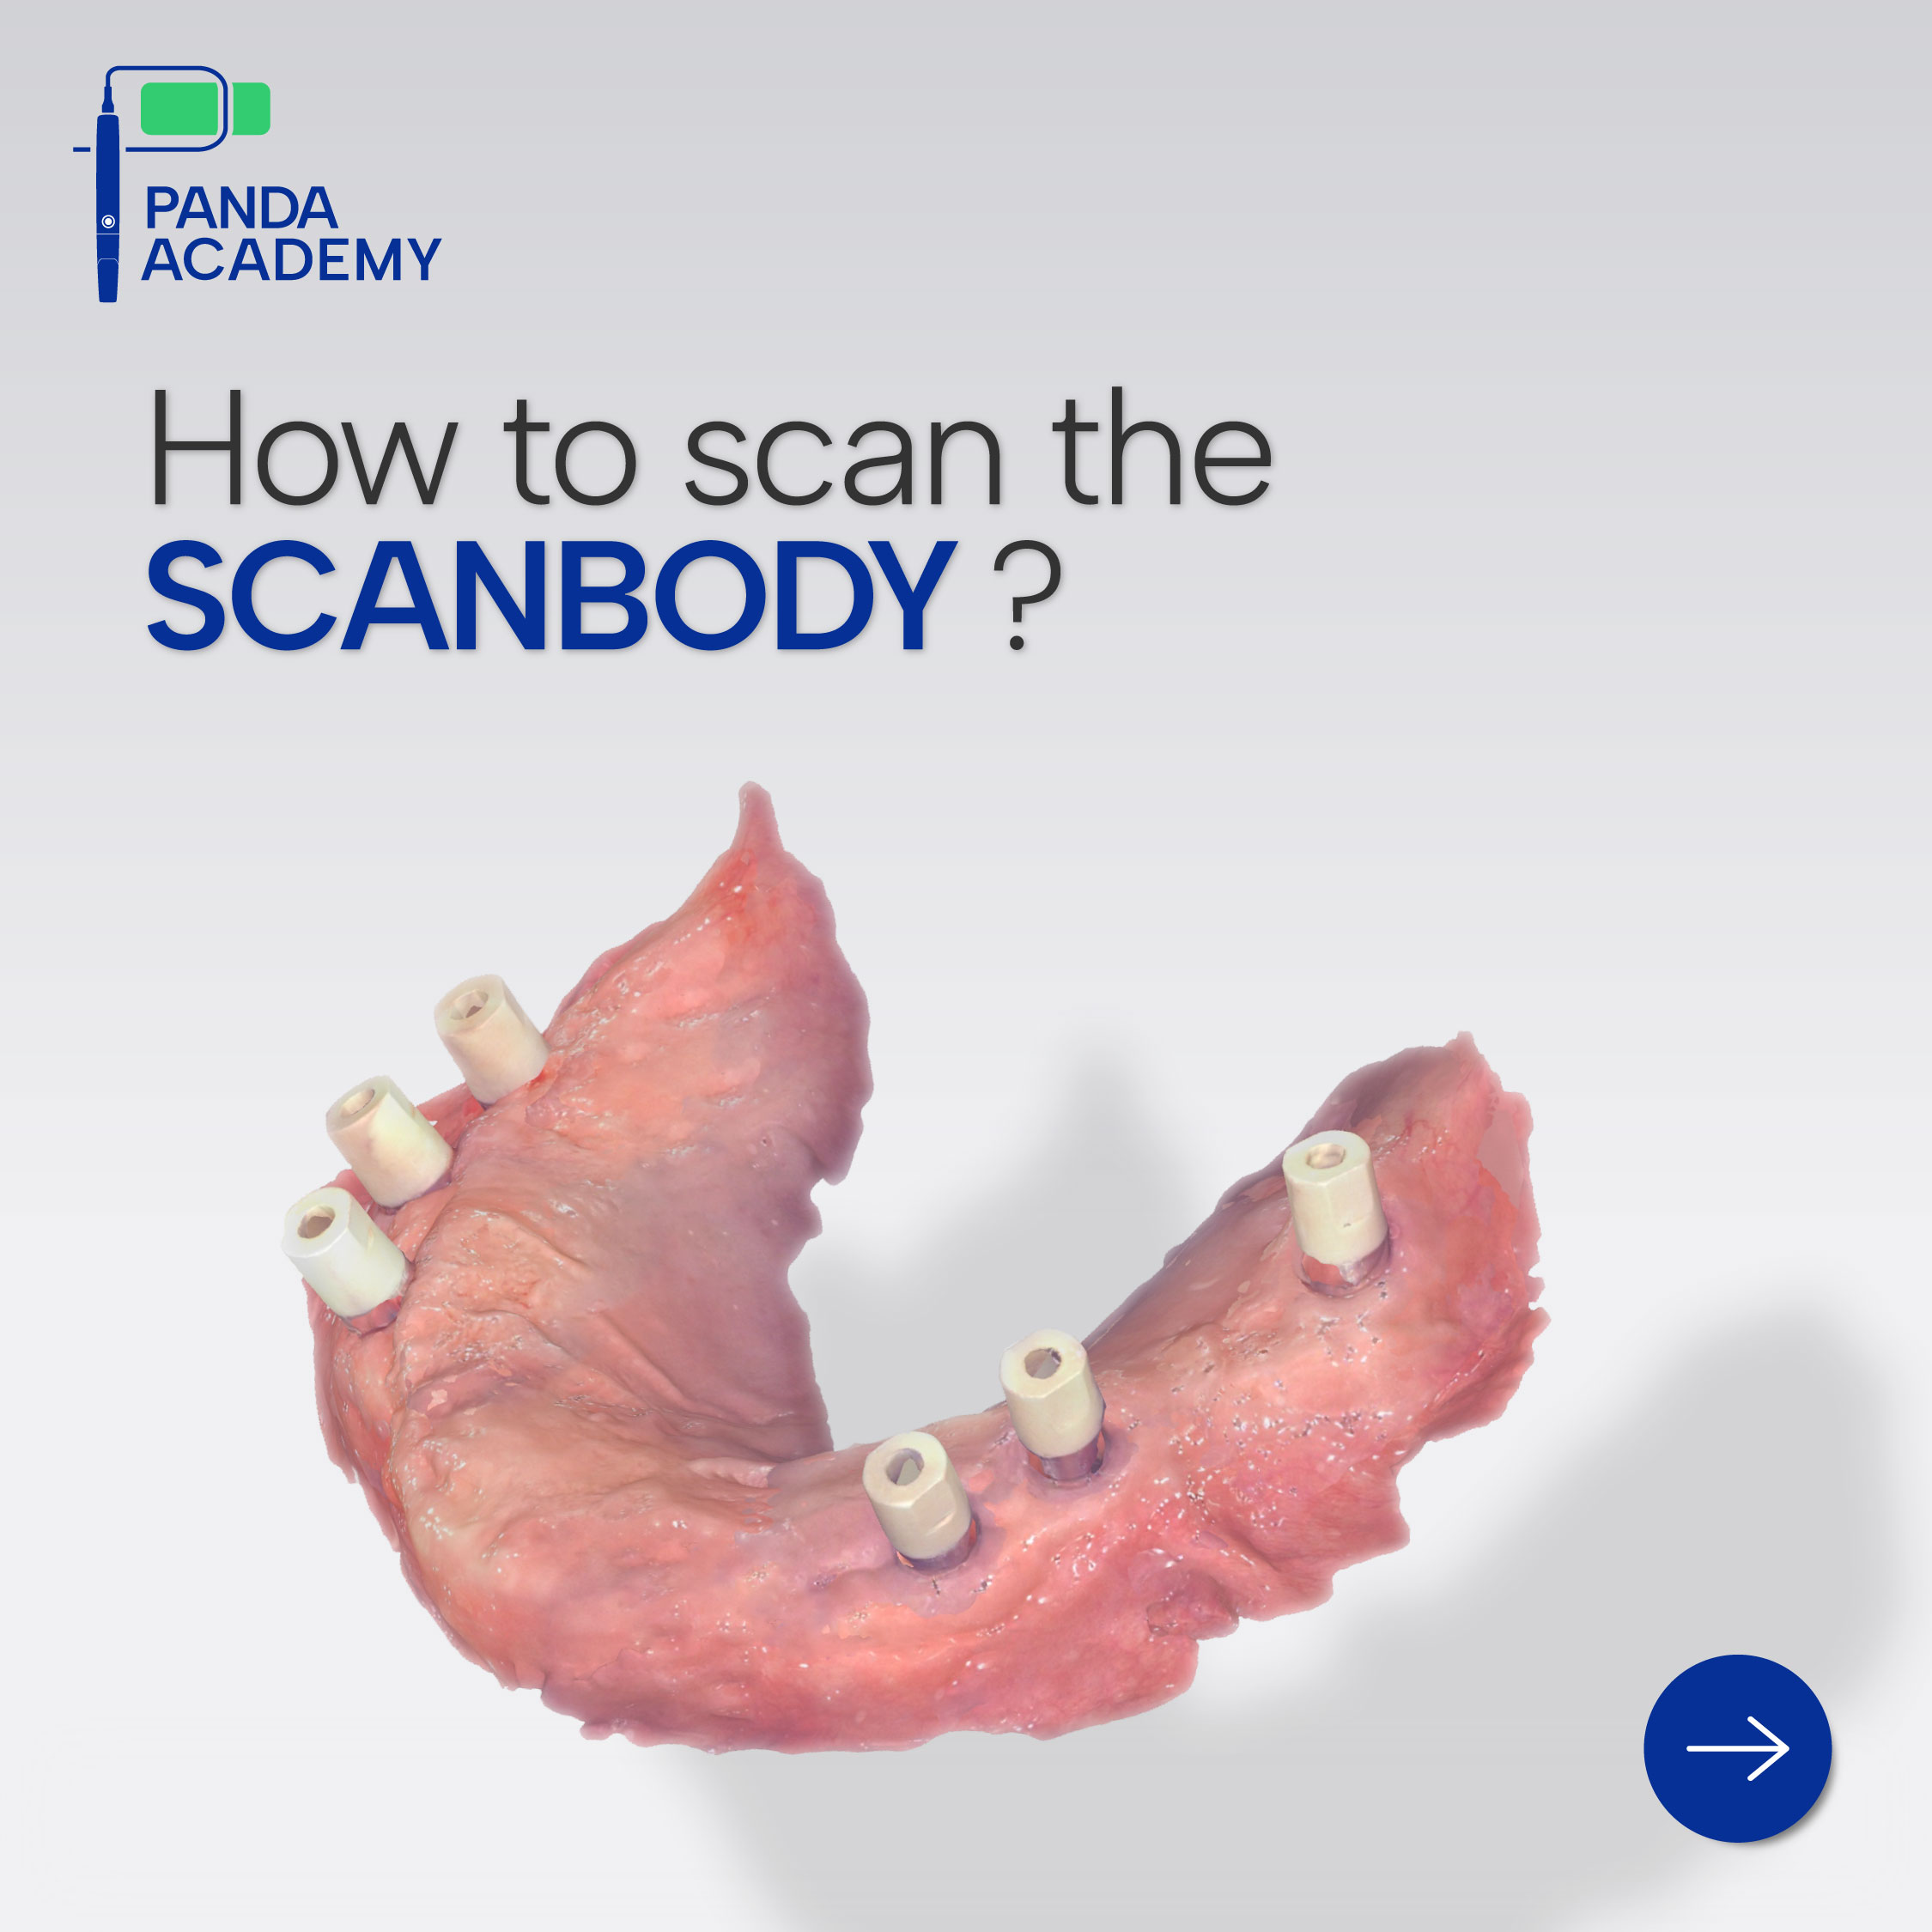 PANDA ACADEMY: How to Scan the Scanbody?